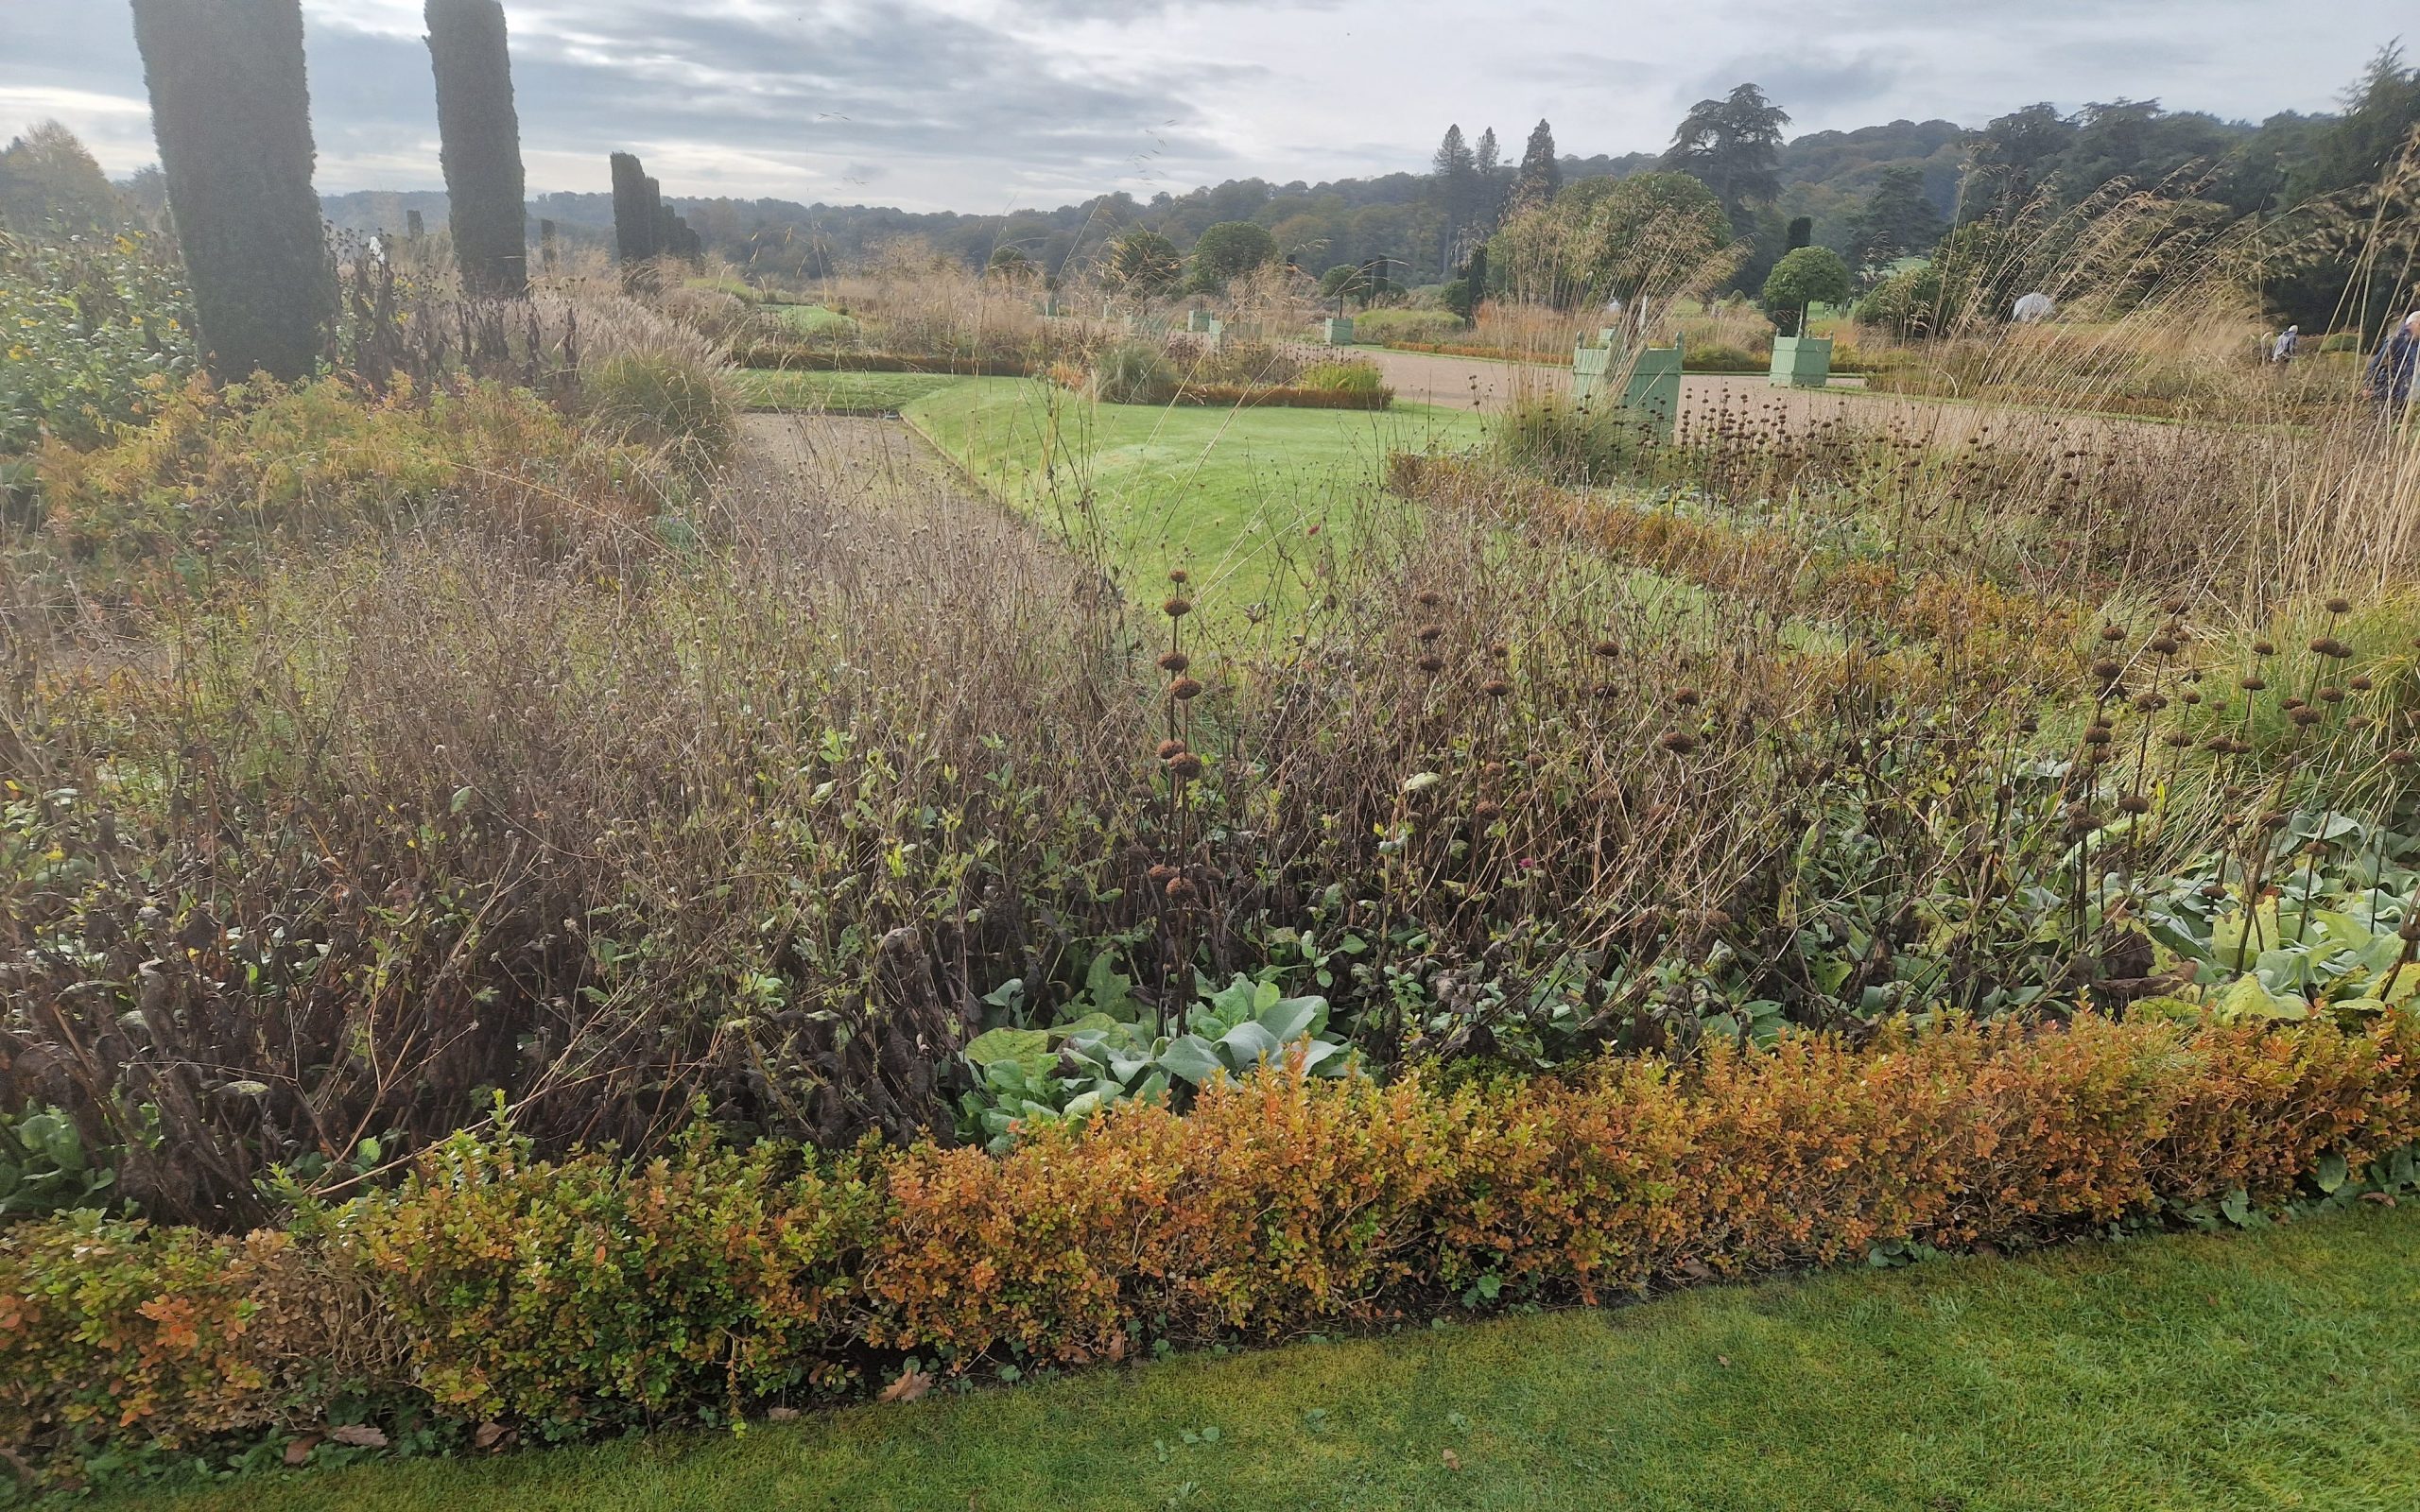 Image of the damaged box hedge in Trentham's Italian Gardens before removal